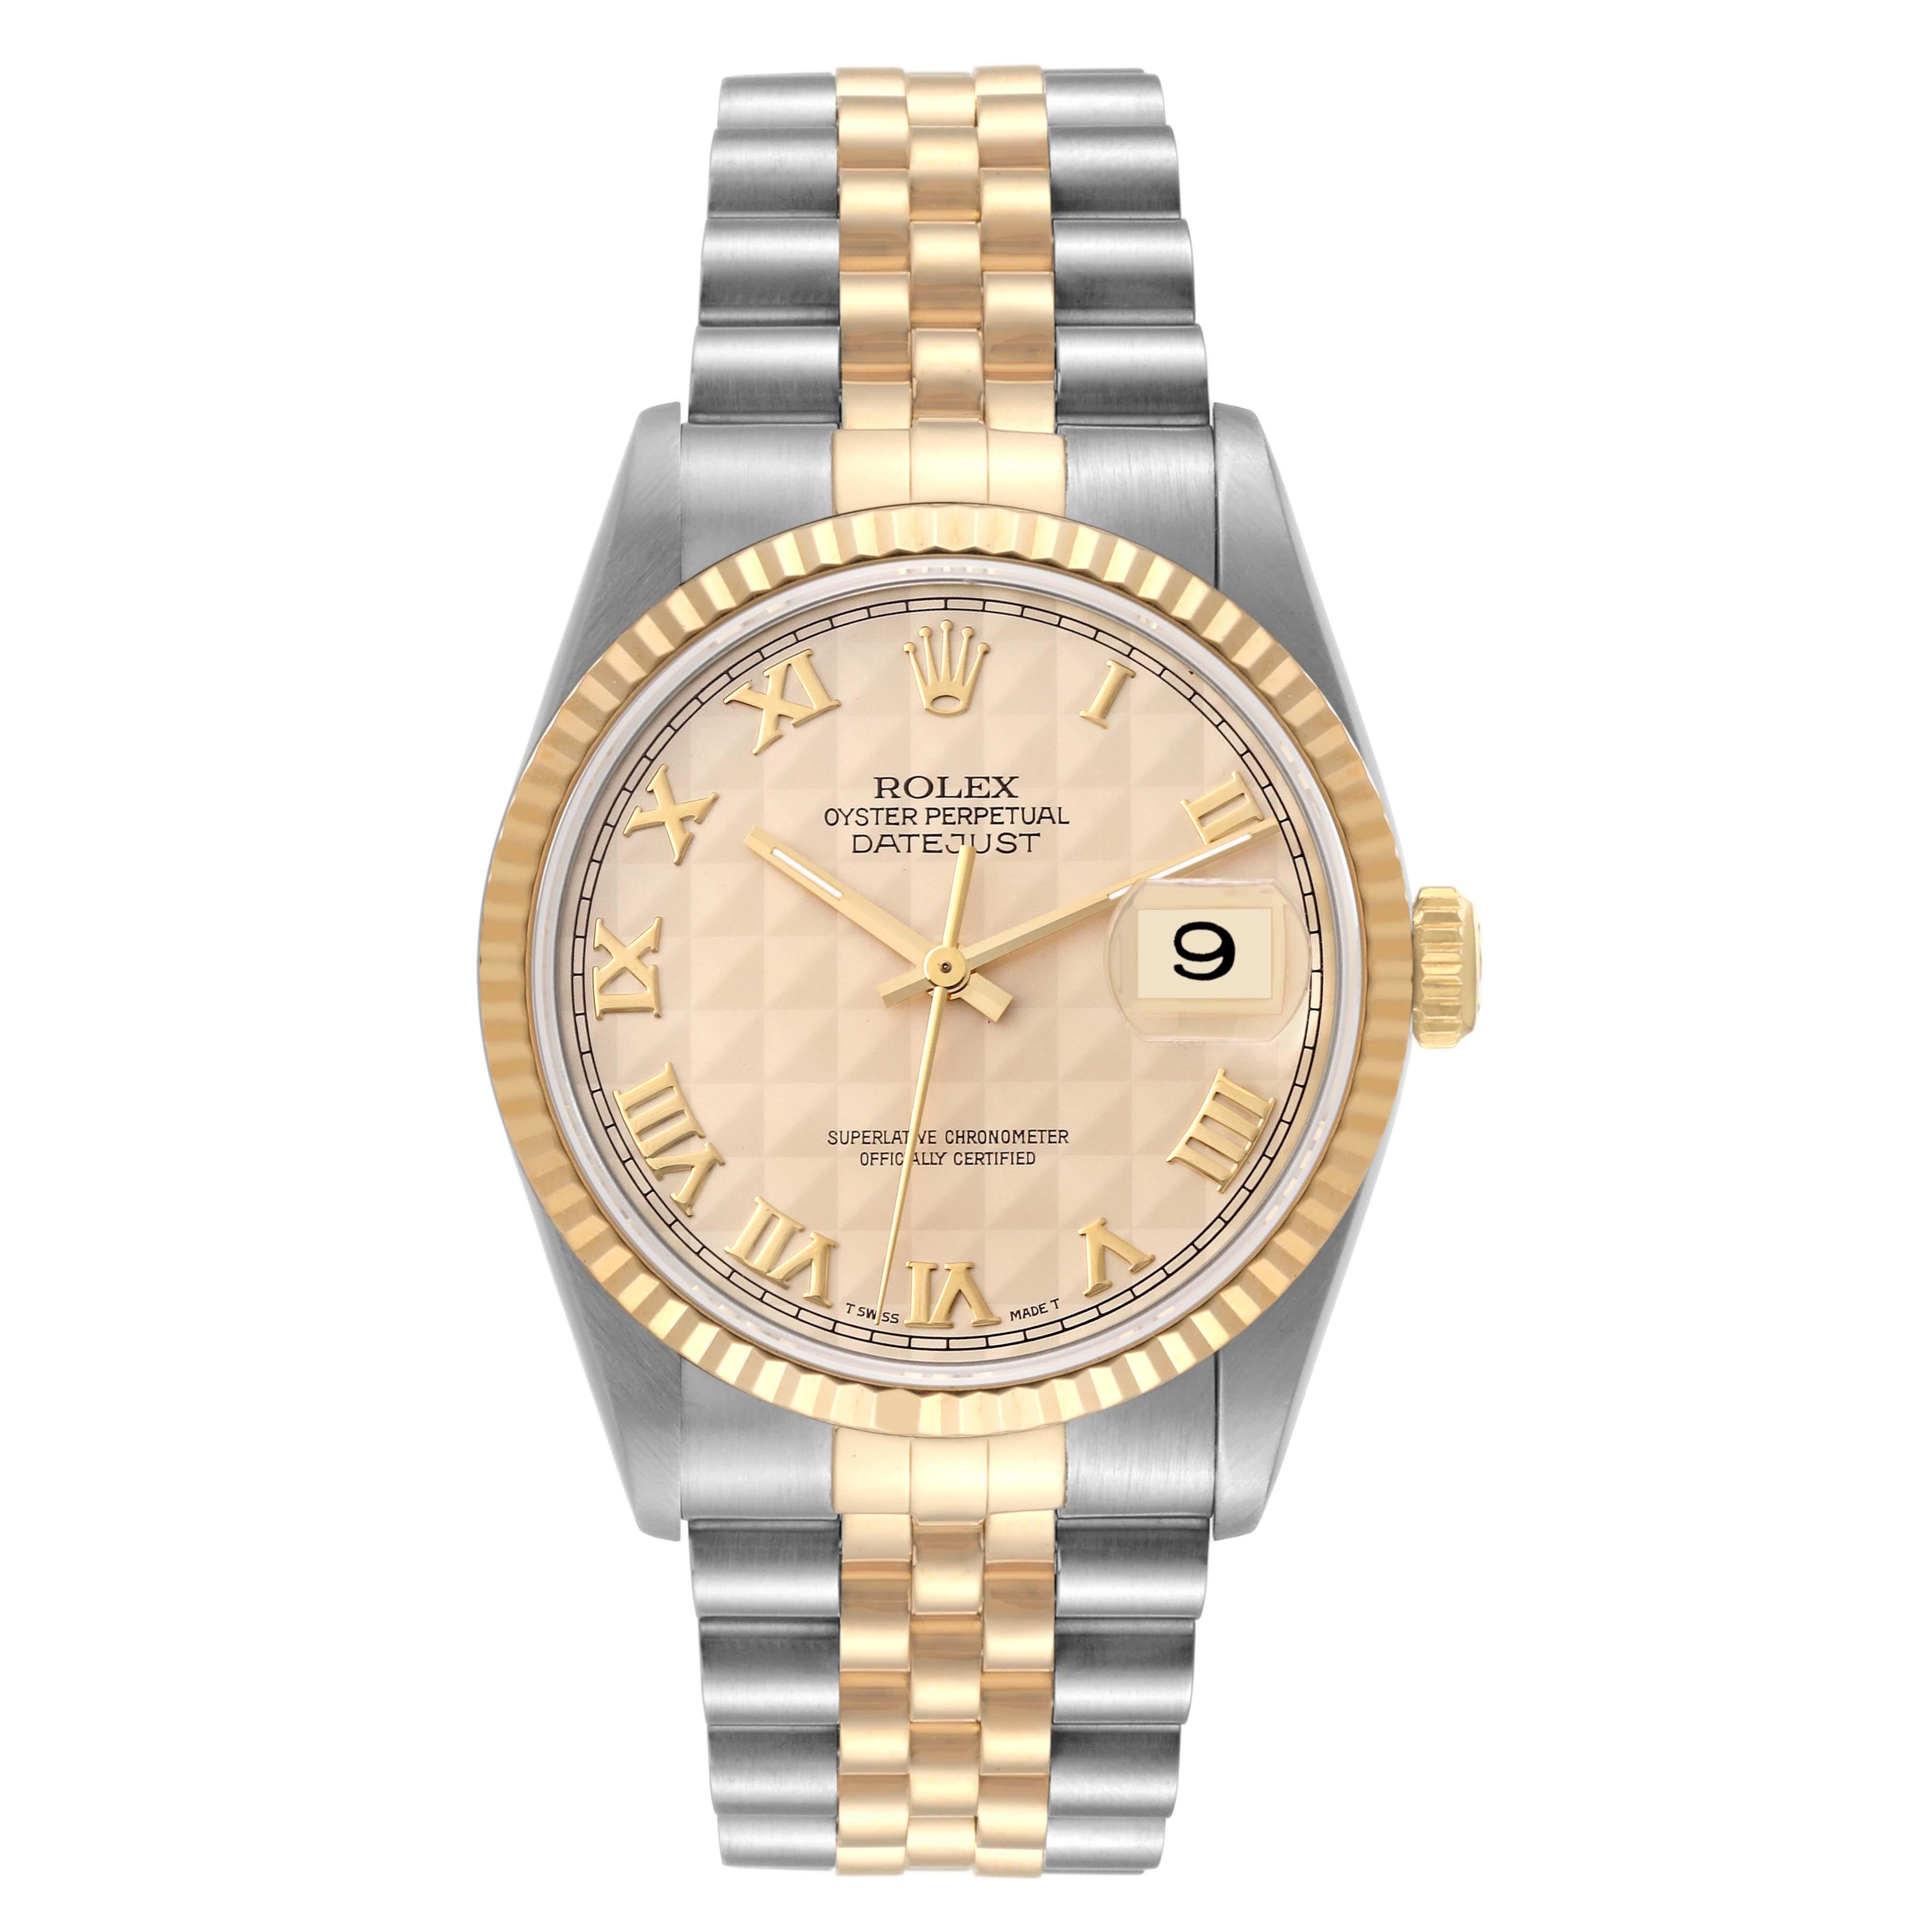 Rolex Datejust Steel Yellow Gold Champagne Pyramid Dial Mens Watch 16233. Officially certified chronometer automatic self-winding movement. Stainless steel case 36 mm in diameter.  Rolex logo on an 18K yellow gold crown. 18k yellow gold fluted